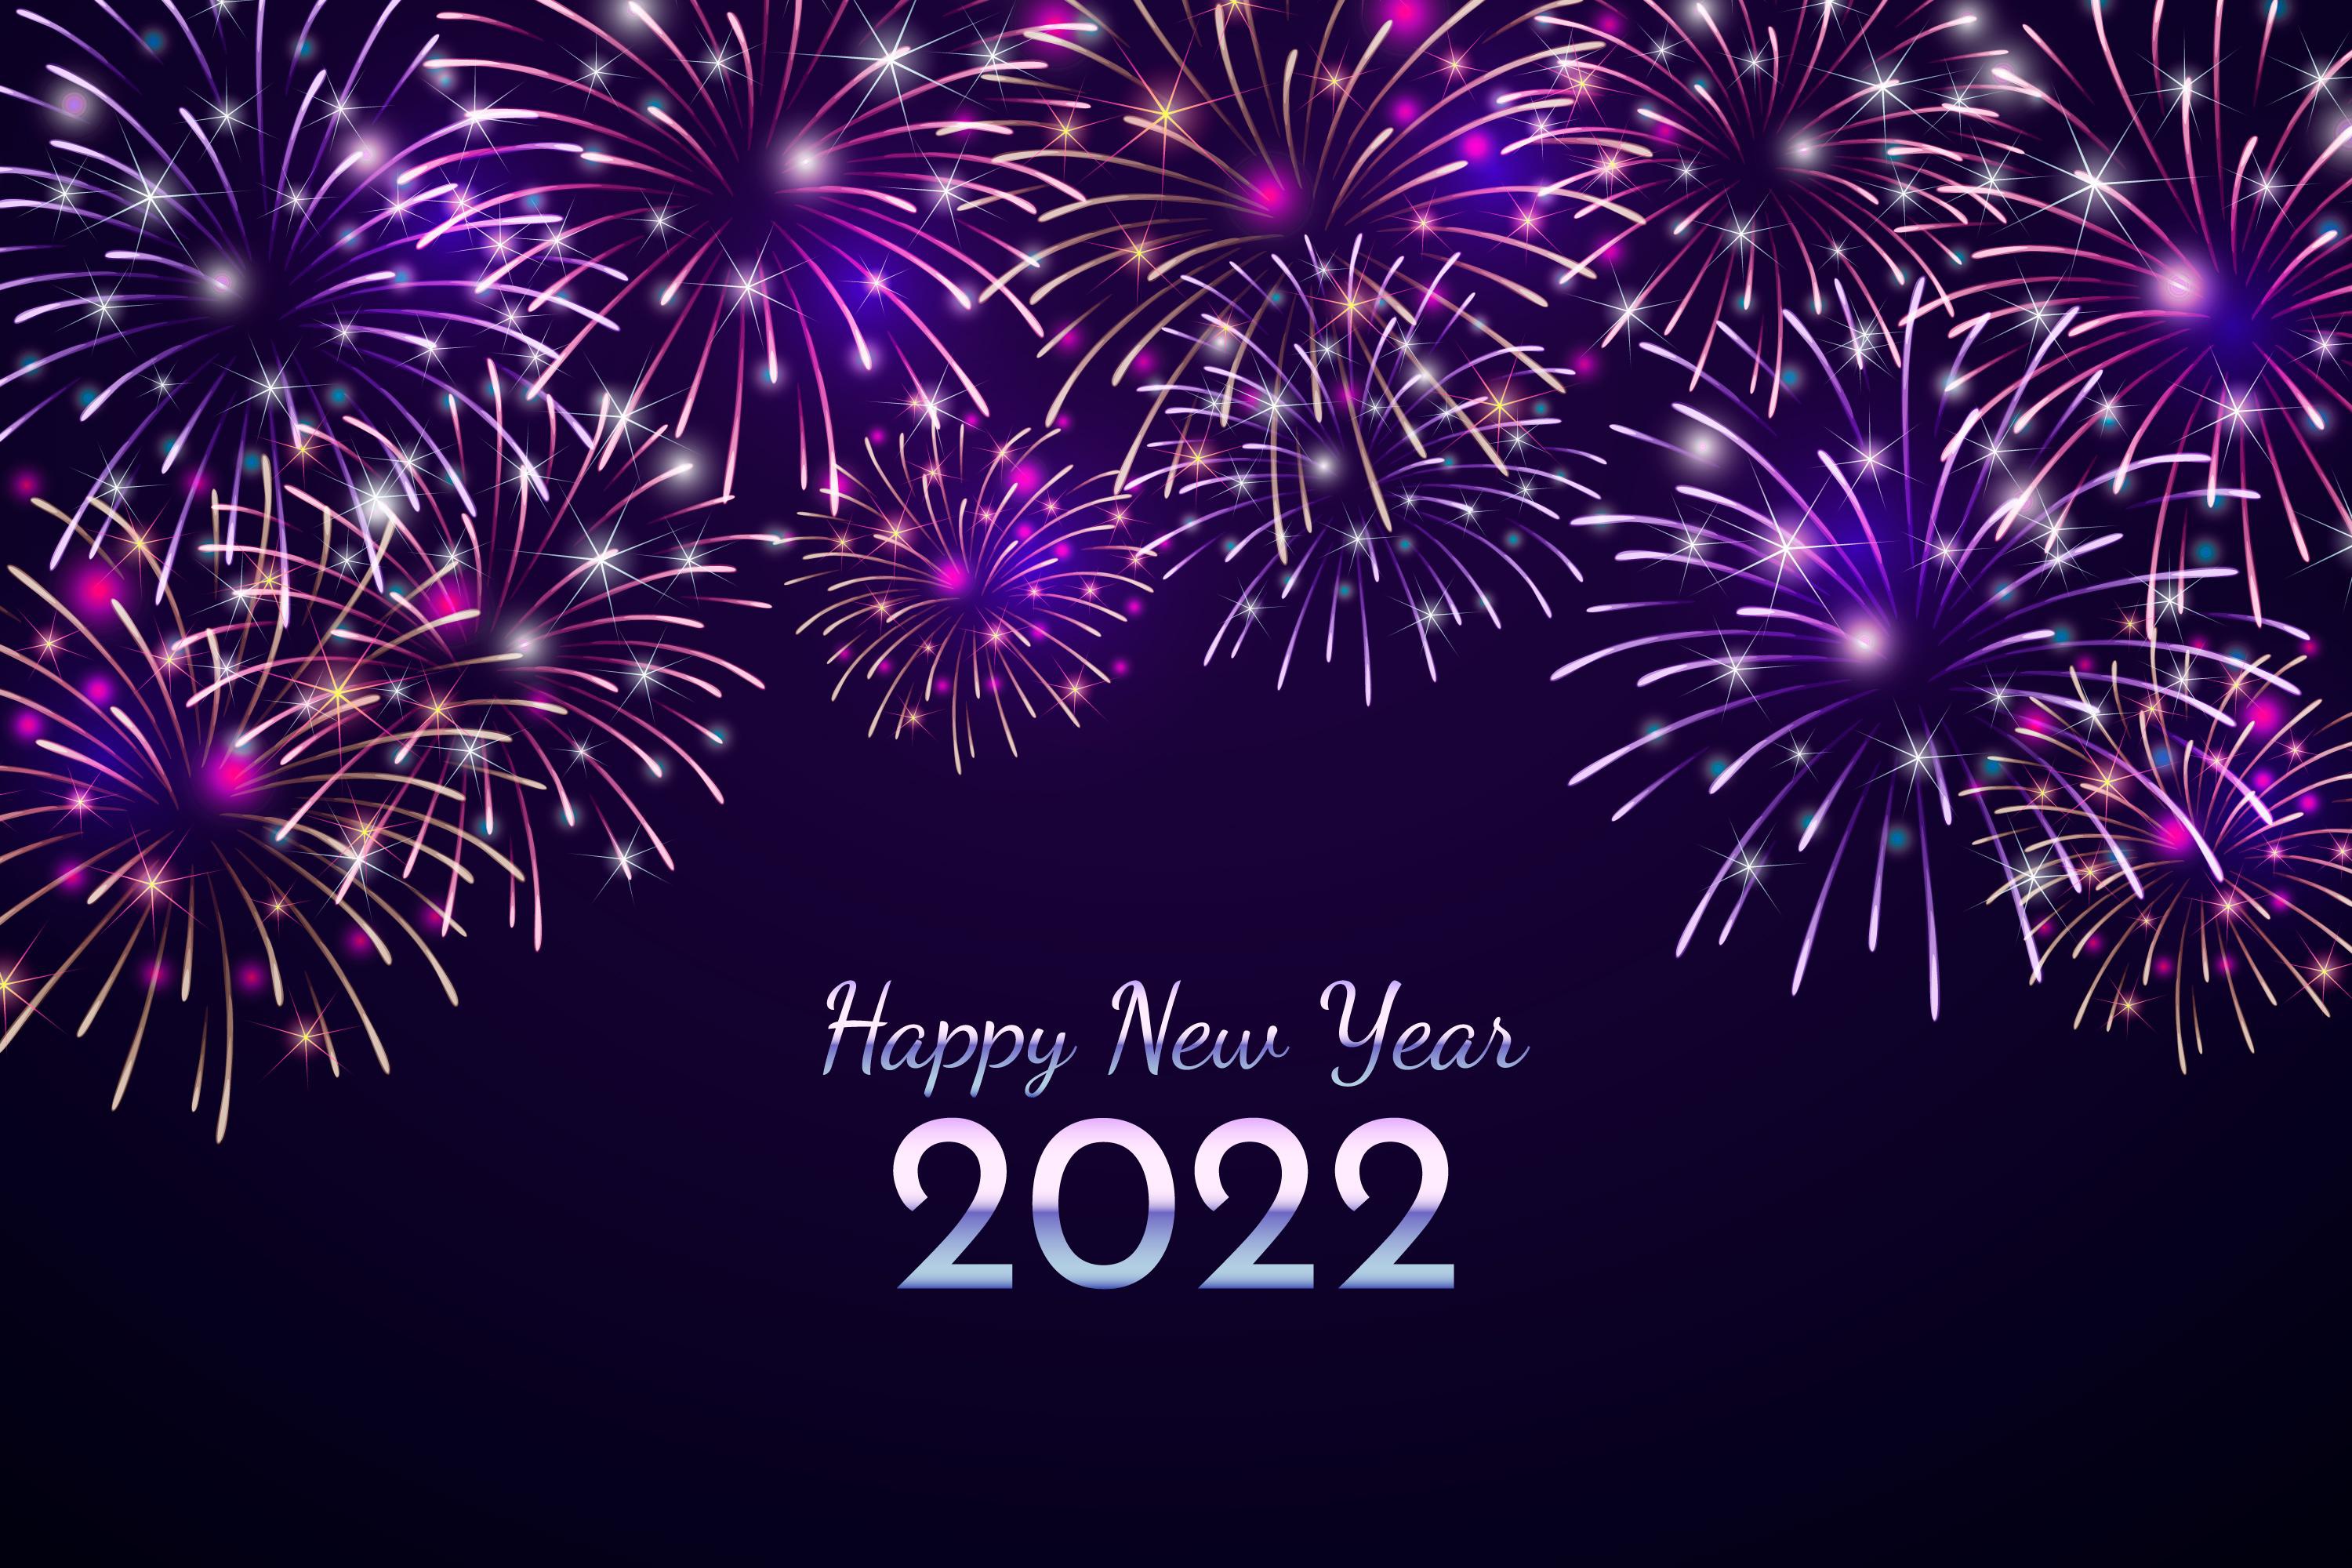 happy new year, holiday, new year 2022, fireworks